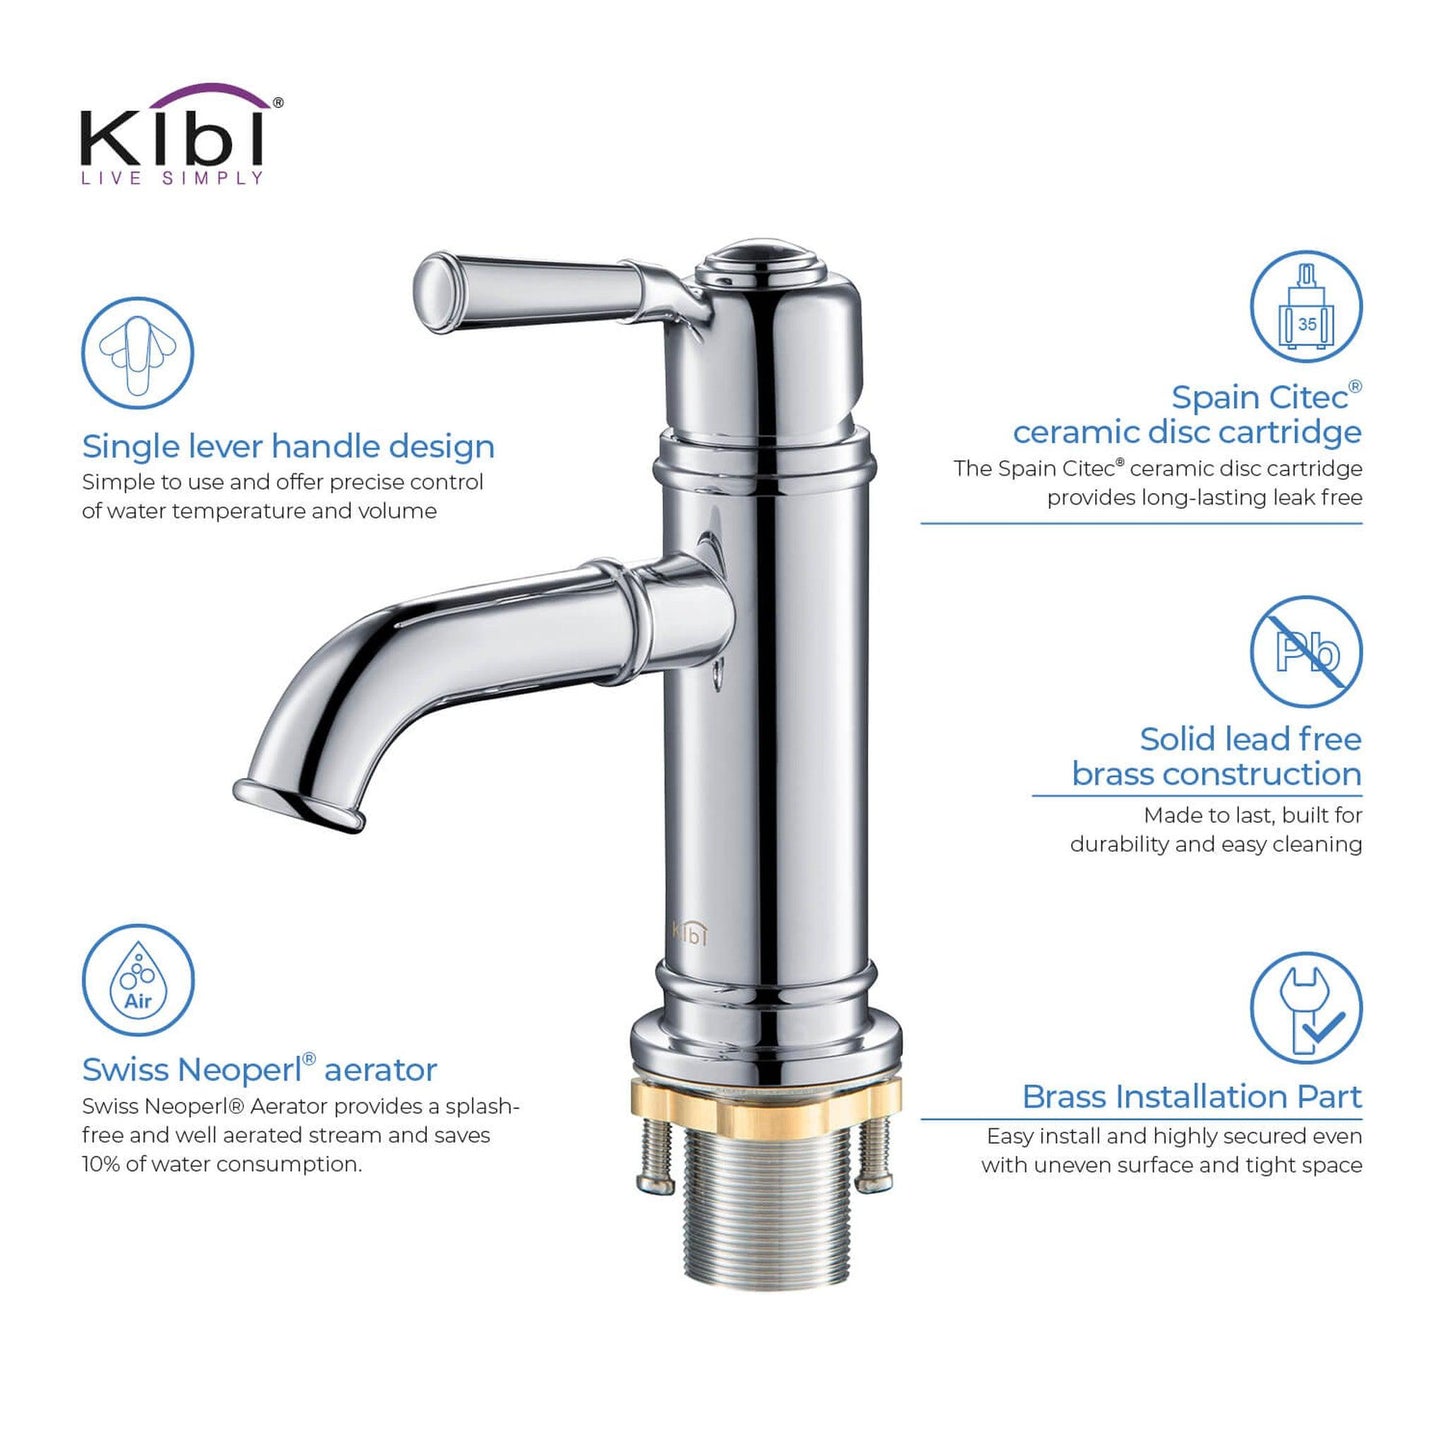 KIBI Victorian Single Handle Chrome Solid Brass Bathroom Vanity Sink Faucet With Pop-Up Drain Stopper Small Cover With Overflow